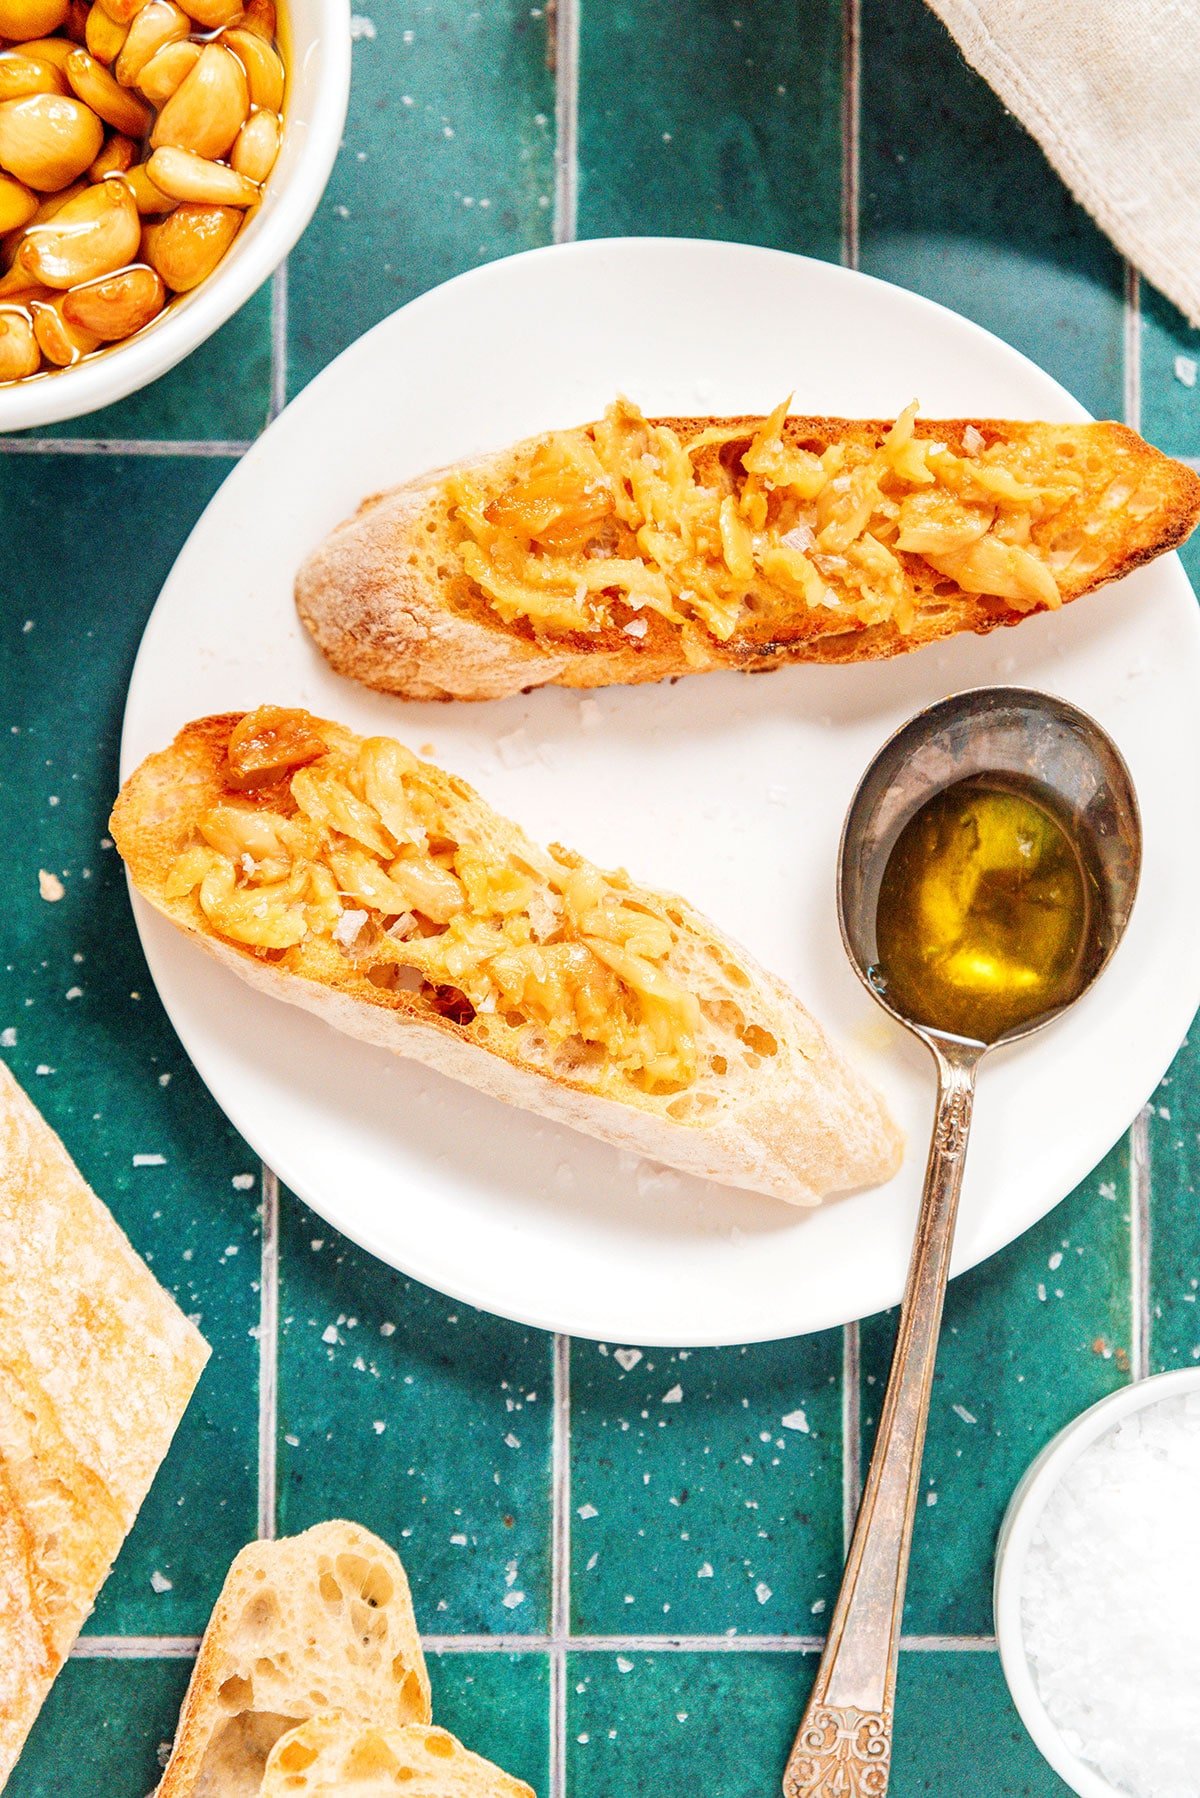 Two slices of toasted bread topped in garlic confit spread